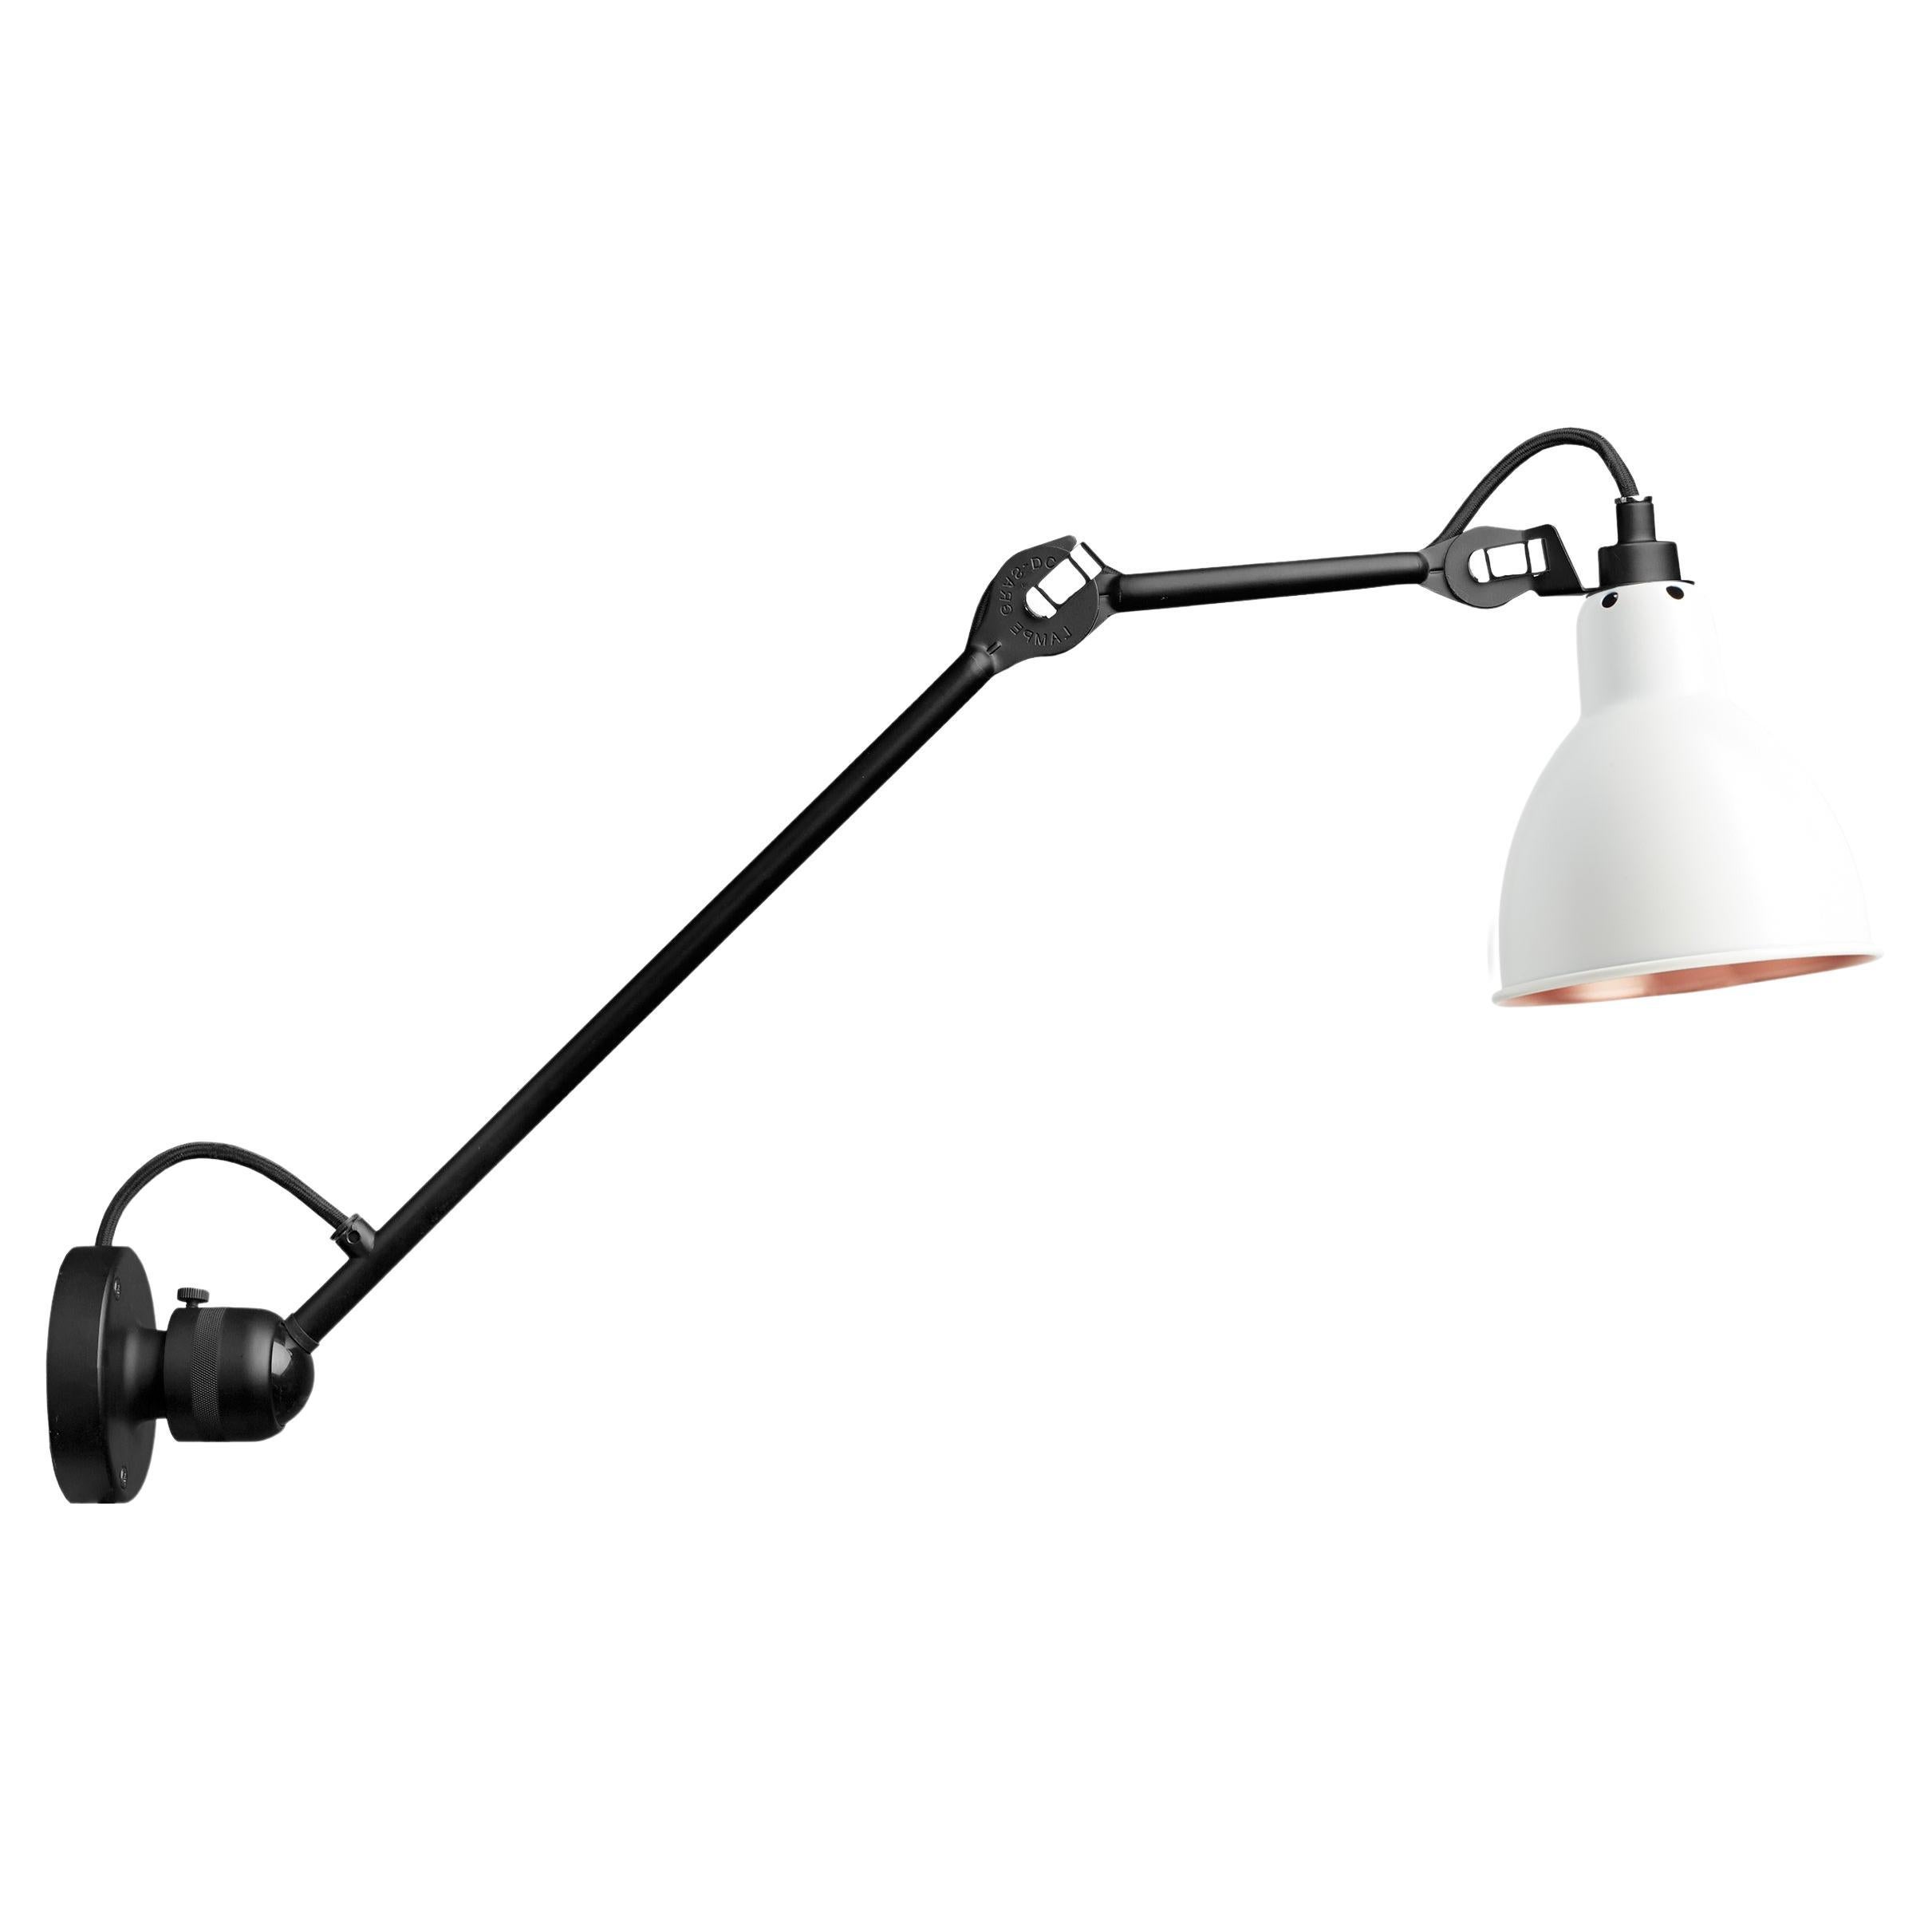 DCW Editions La Lampe Gras N°304 L40 Wall Lamp in Black Arm & White Copper Shade